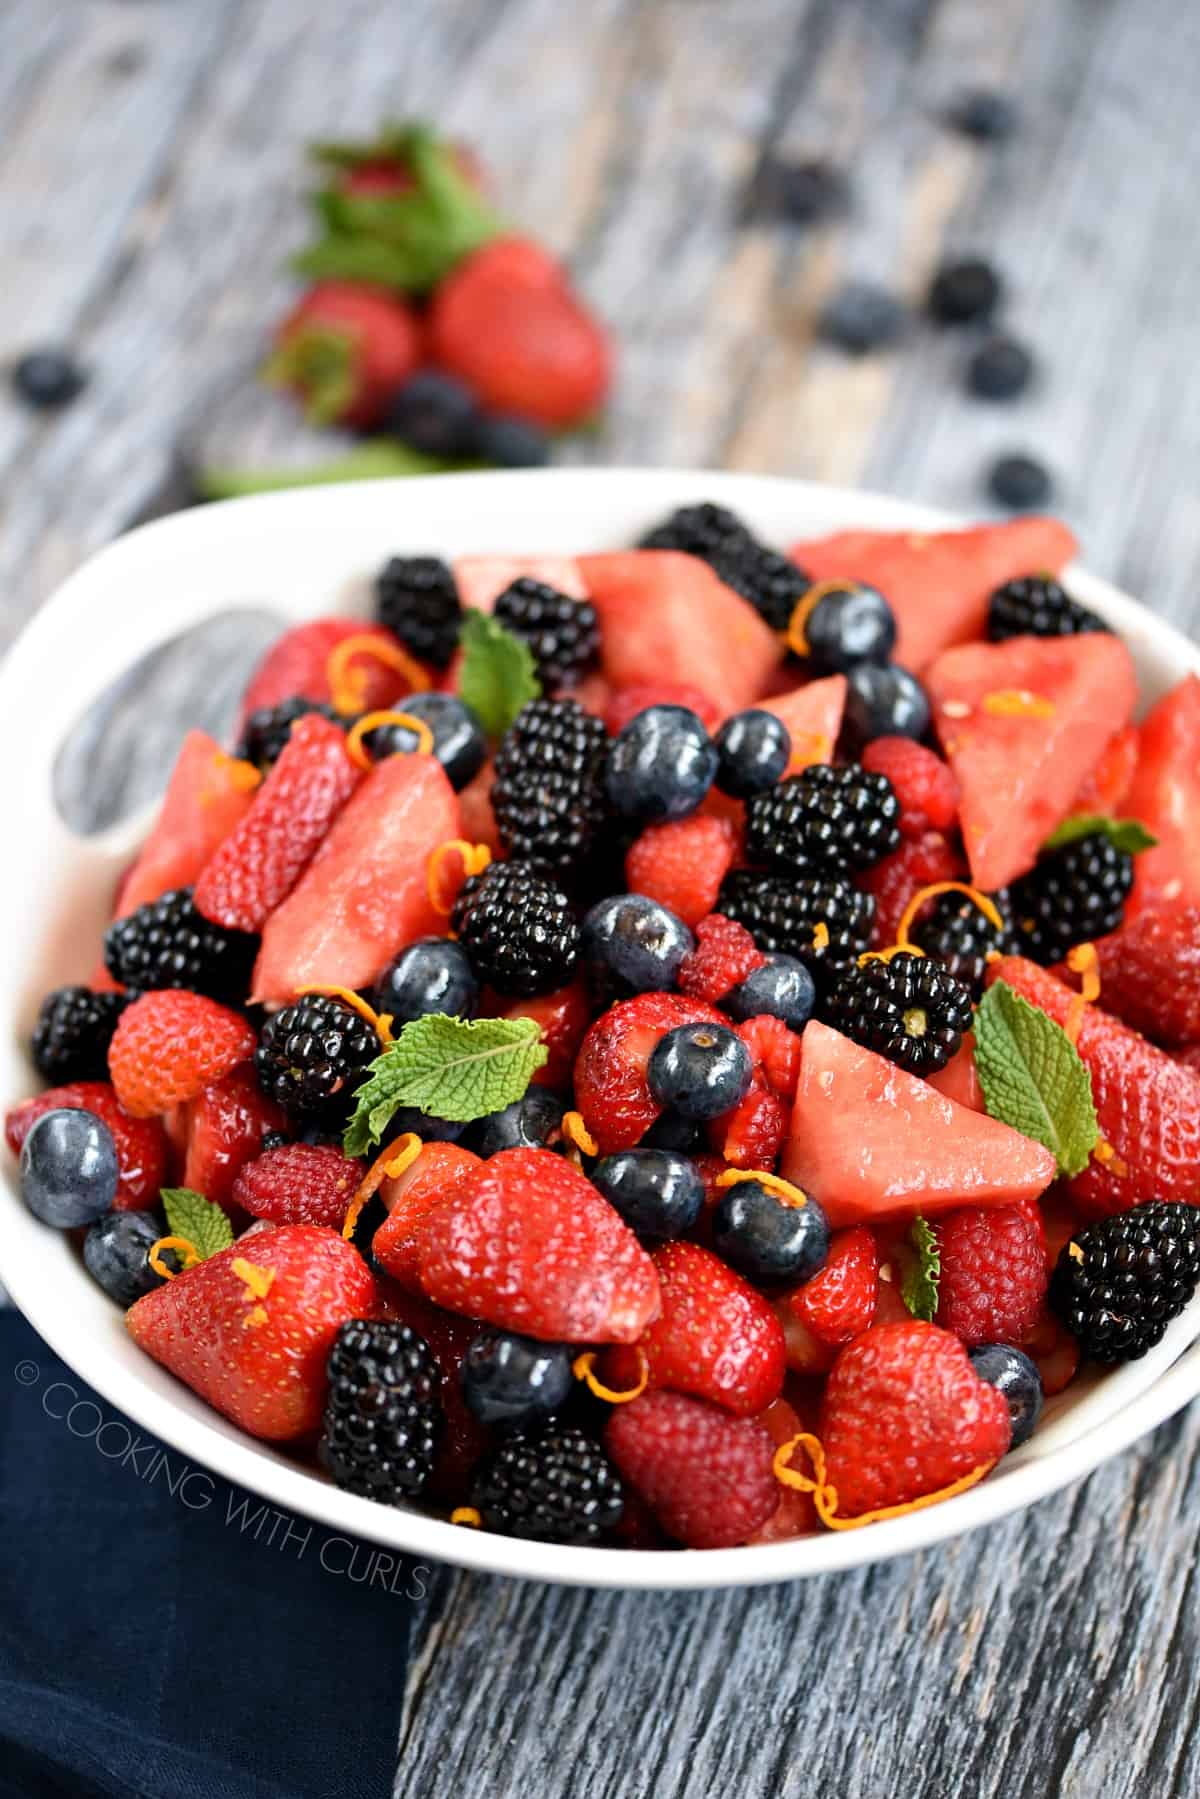 Watermelon, blackberries, blueberries and strawberries fruit salad tossed together in a large white serving bowl and garnished with mint leaves.